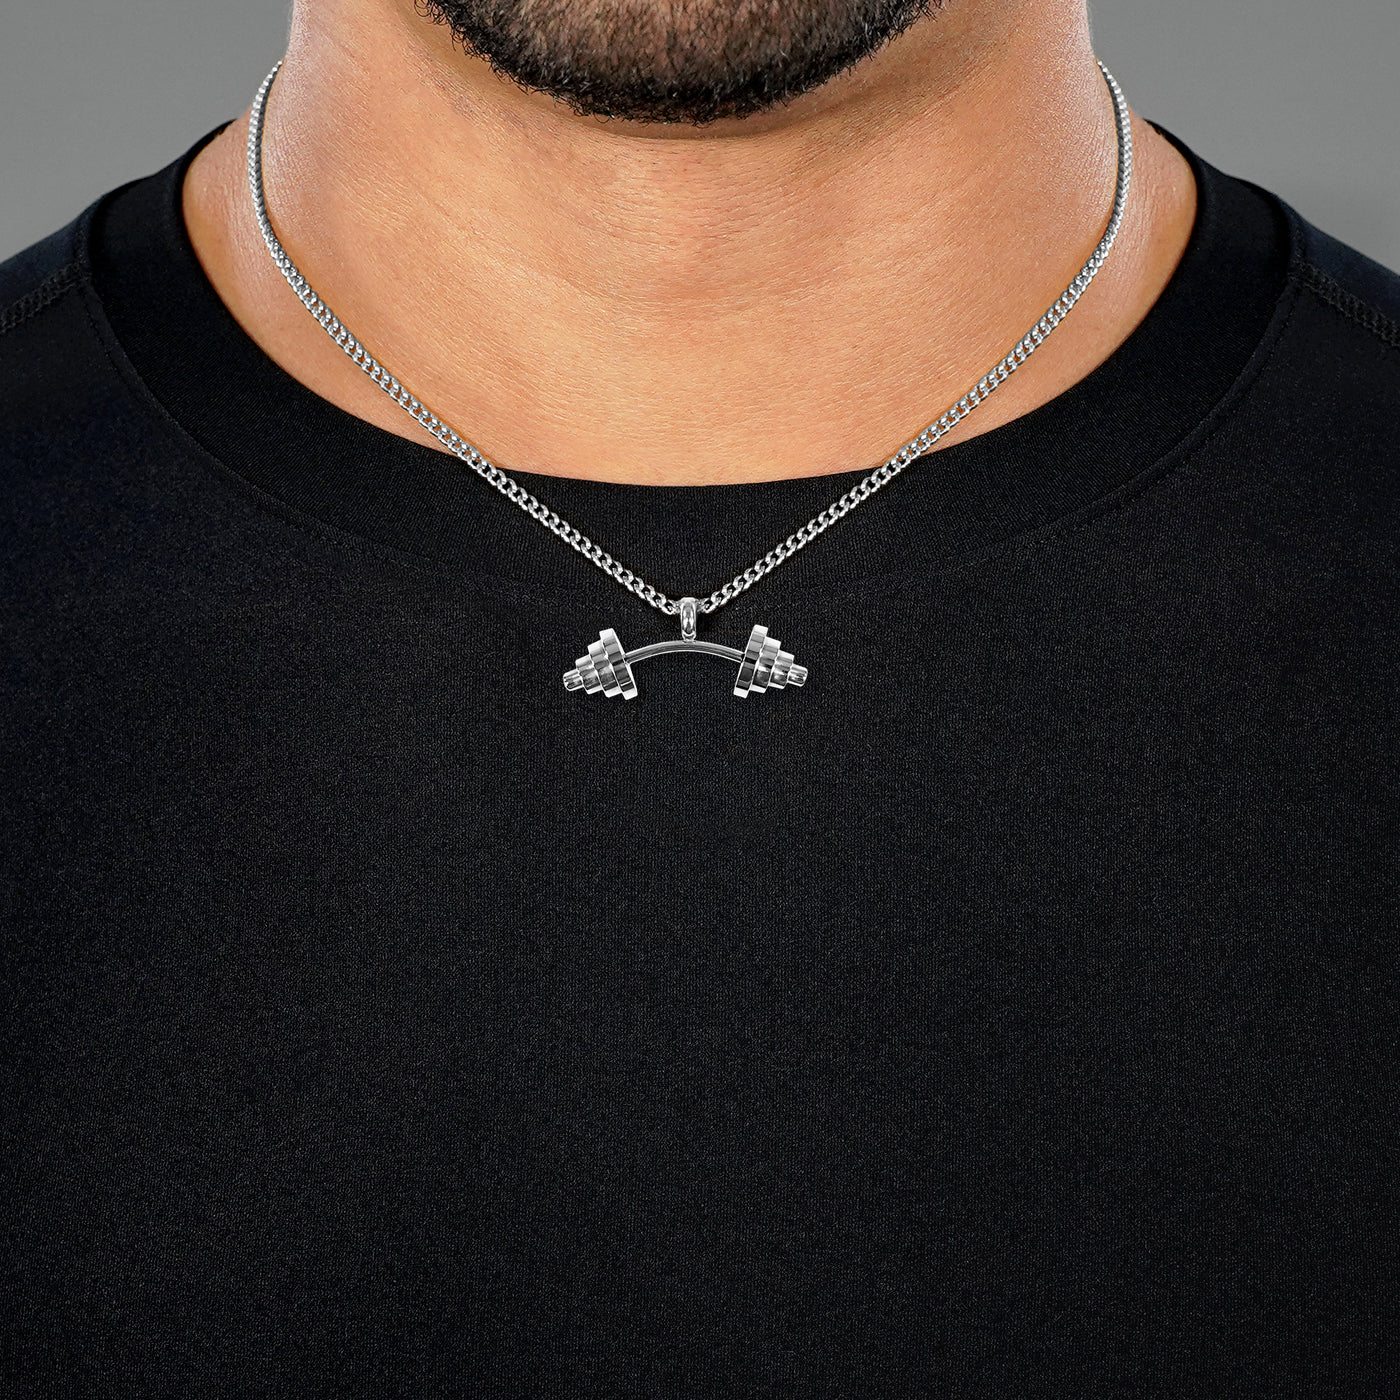 Gym Weights 1¾" Pendant with Chain Necklace - Stainless Steel